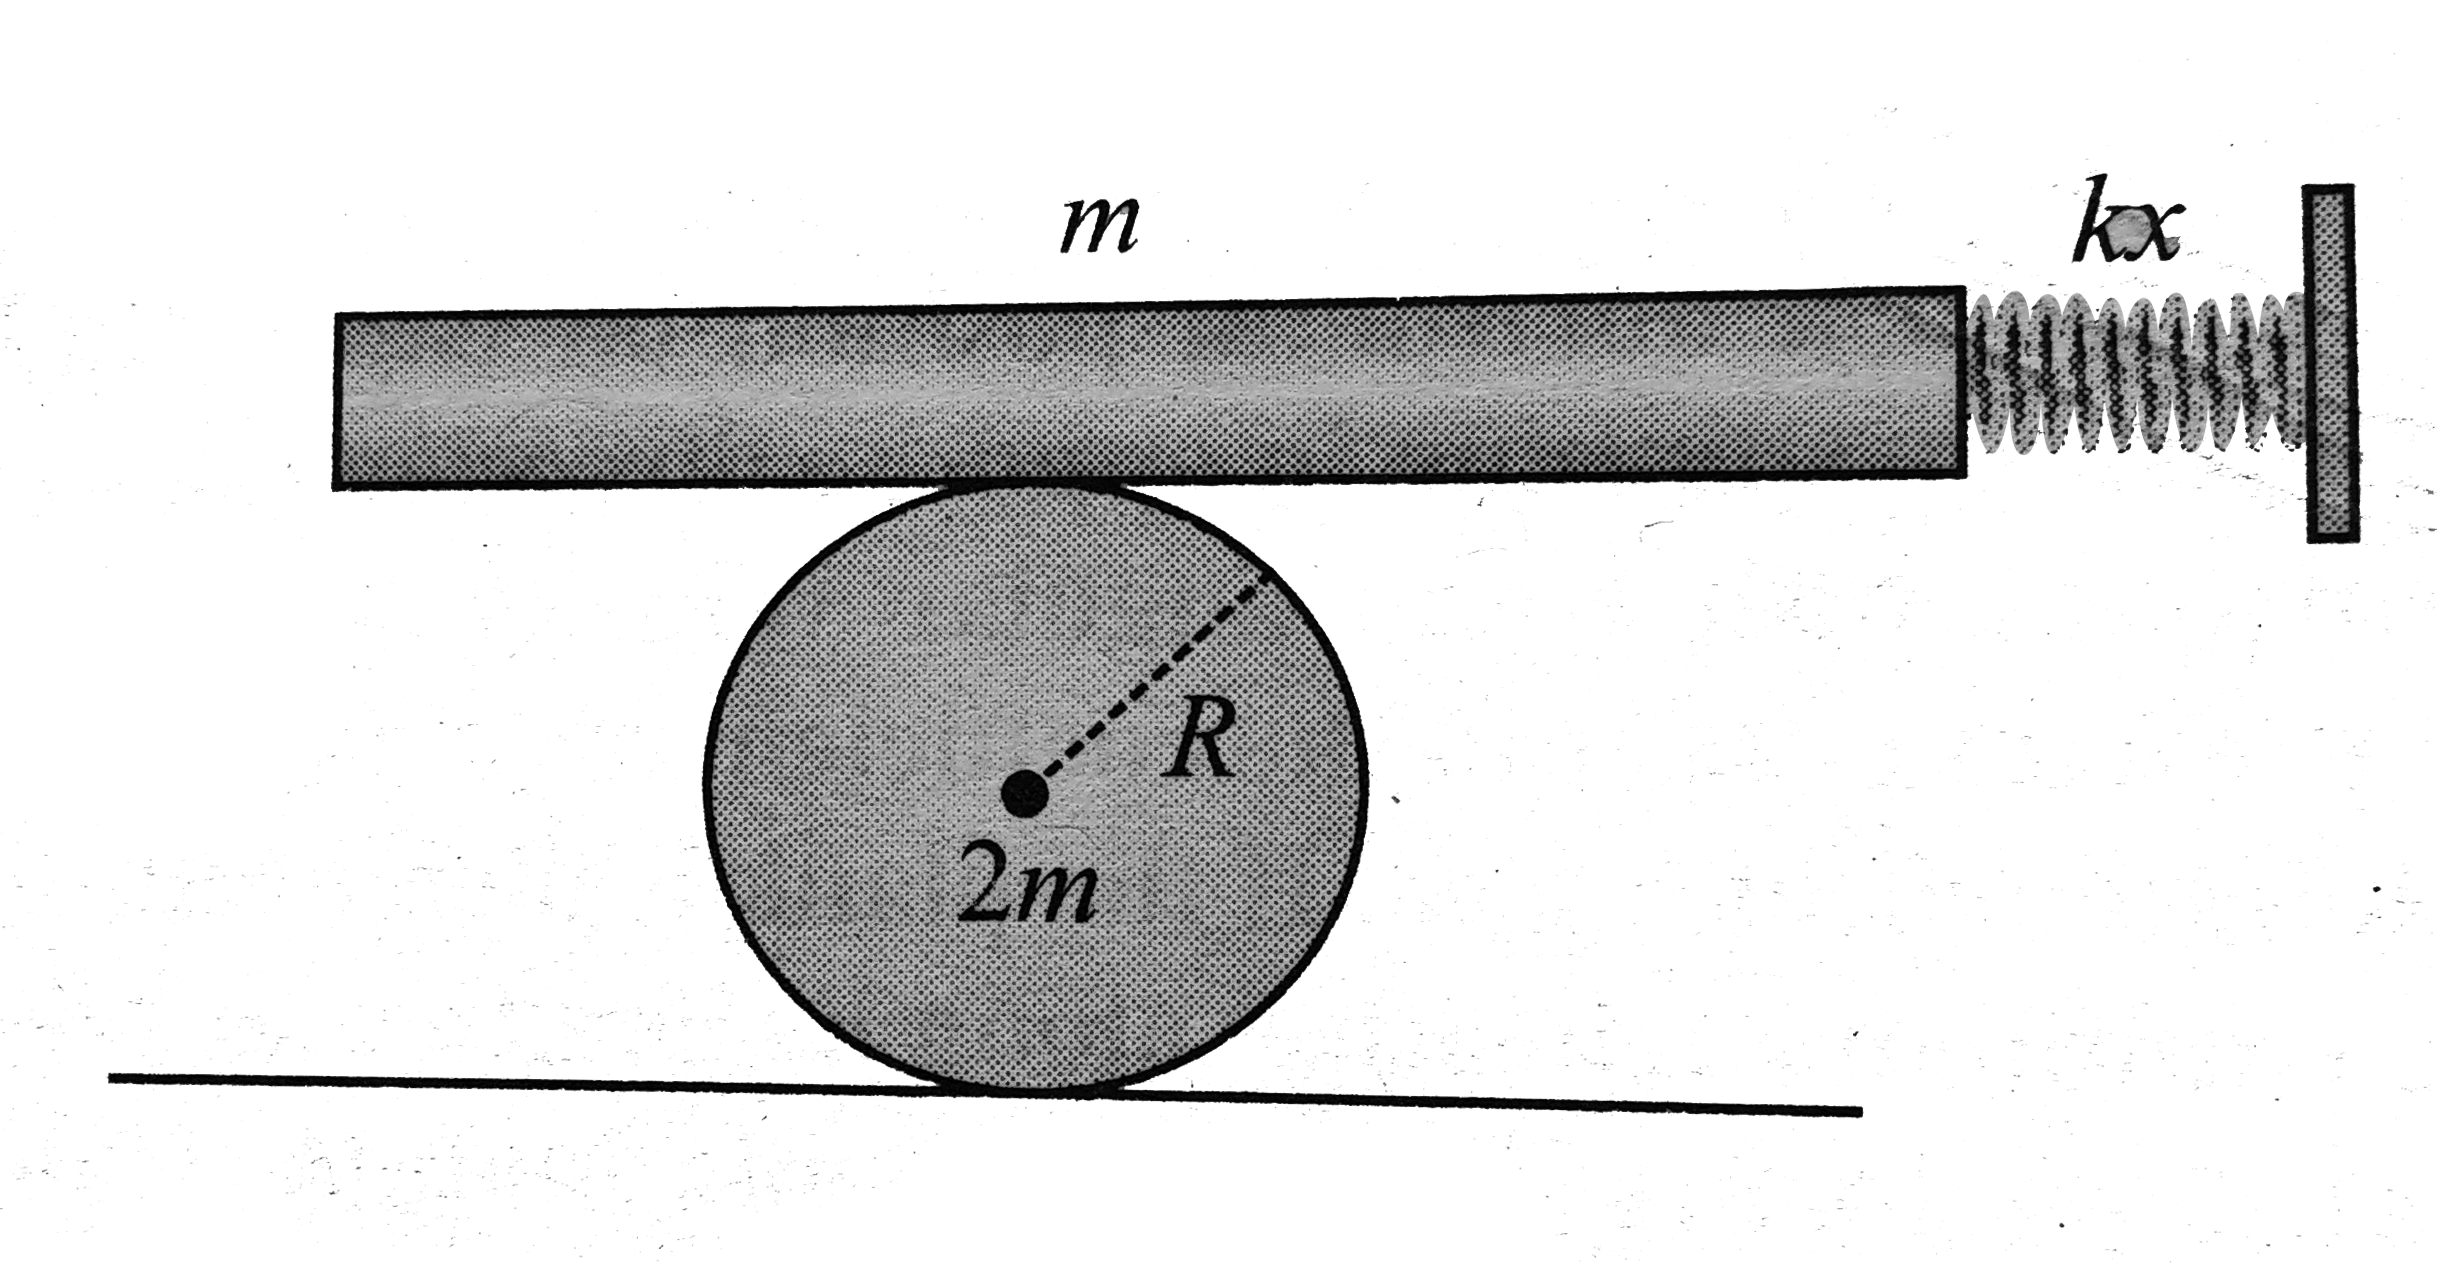 A uniform plank  of mass m, free to move in the horizontal direction only , is placed at the top of a solid cylinder of mass 2 m and radius R. The plank is attached to a fixed wall by mean of a light spring constant k. There is no slipping between the cylinder and the planck , and between the cylinder and the ground. Find the time period of small oscillation of the system.